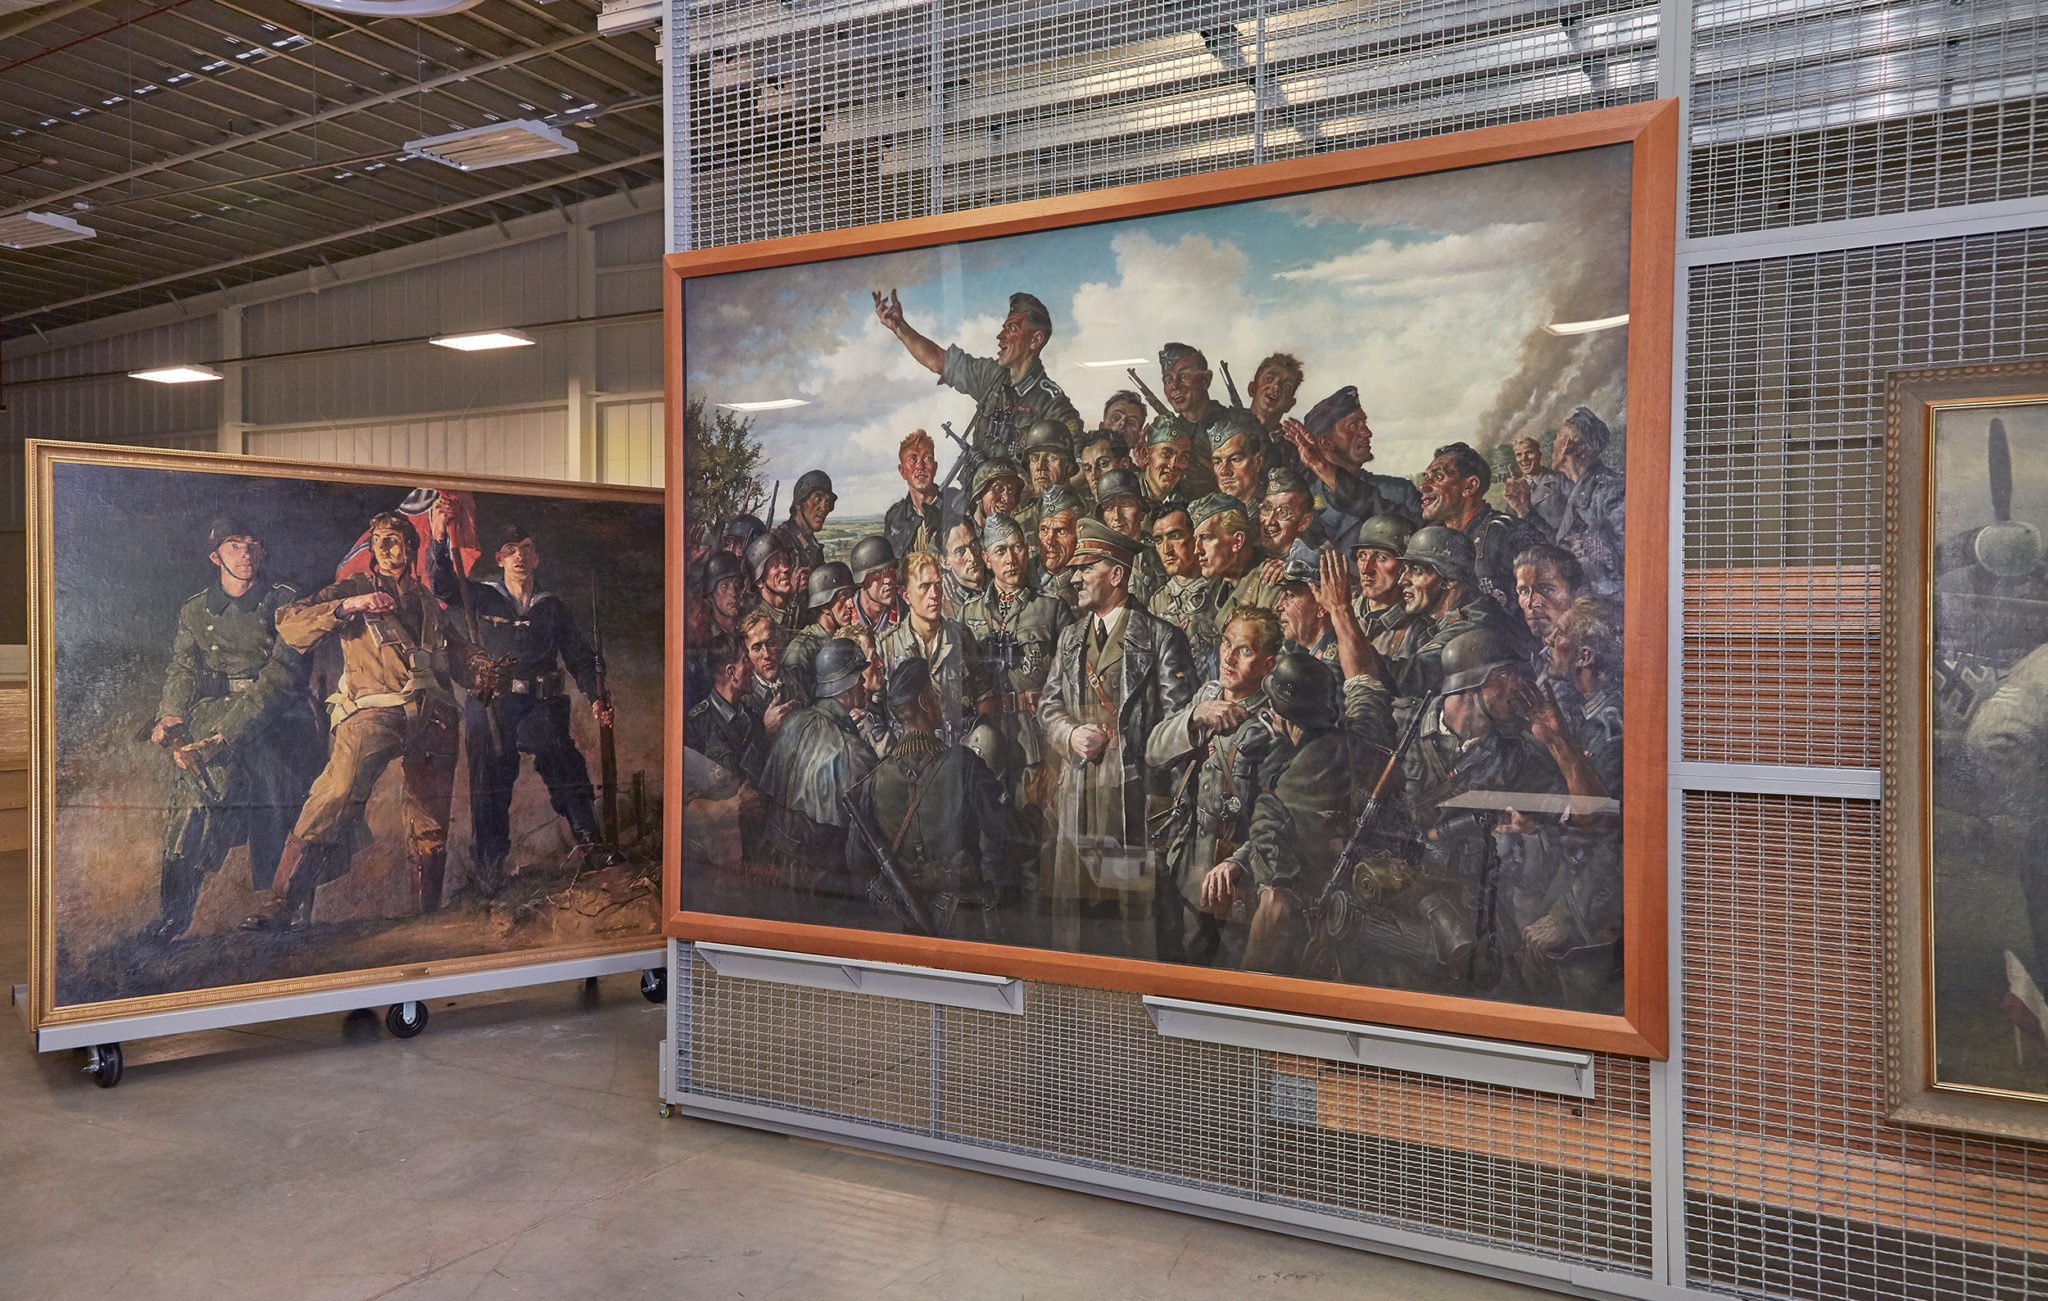 How a Trove of Nazi Art Wound Up Under Lock and Key on an Army Base in Virginia